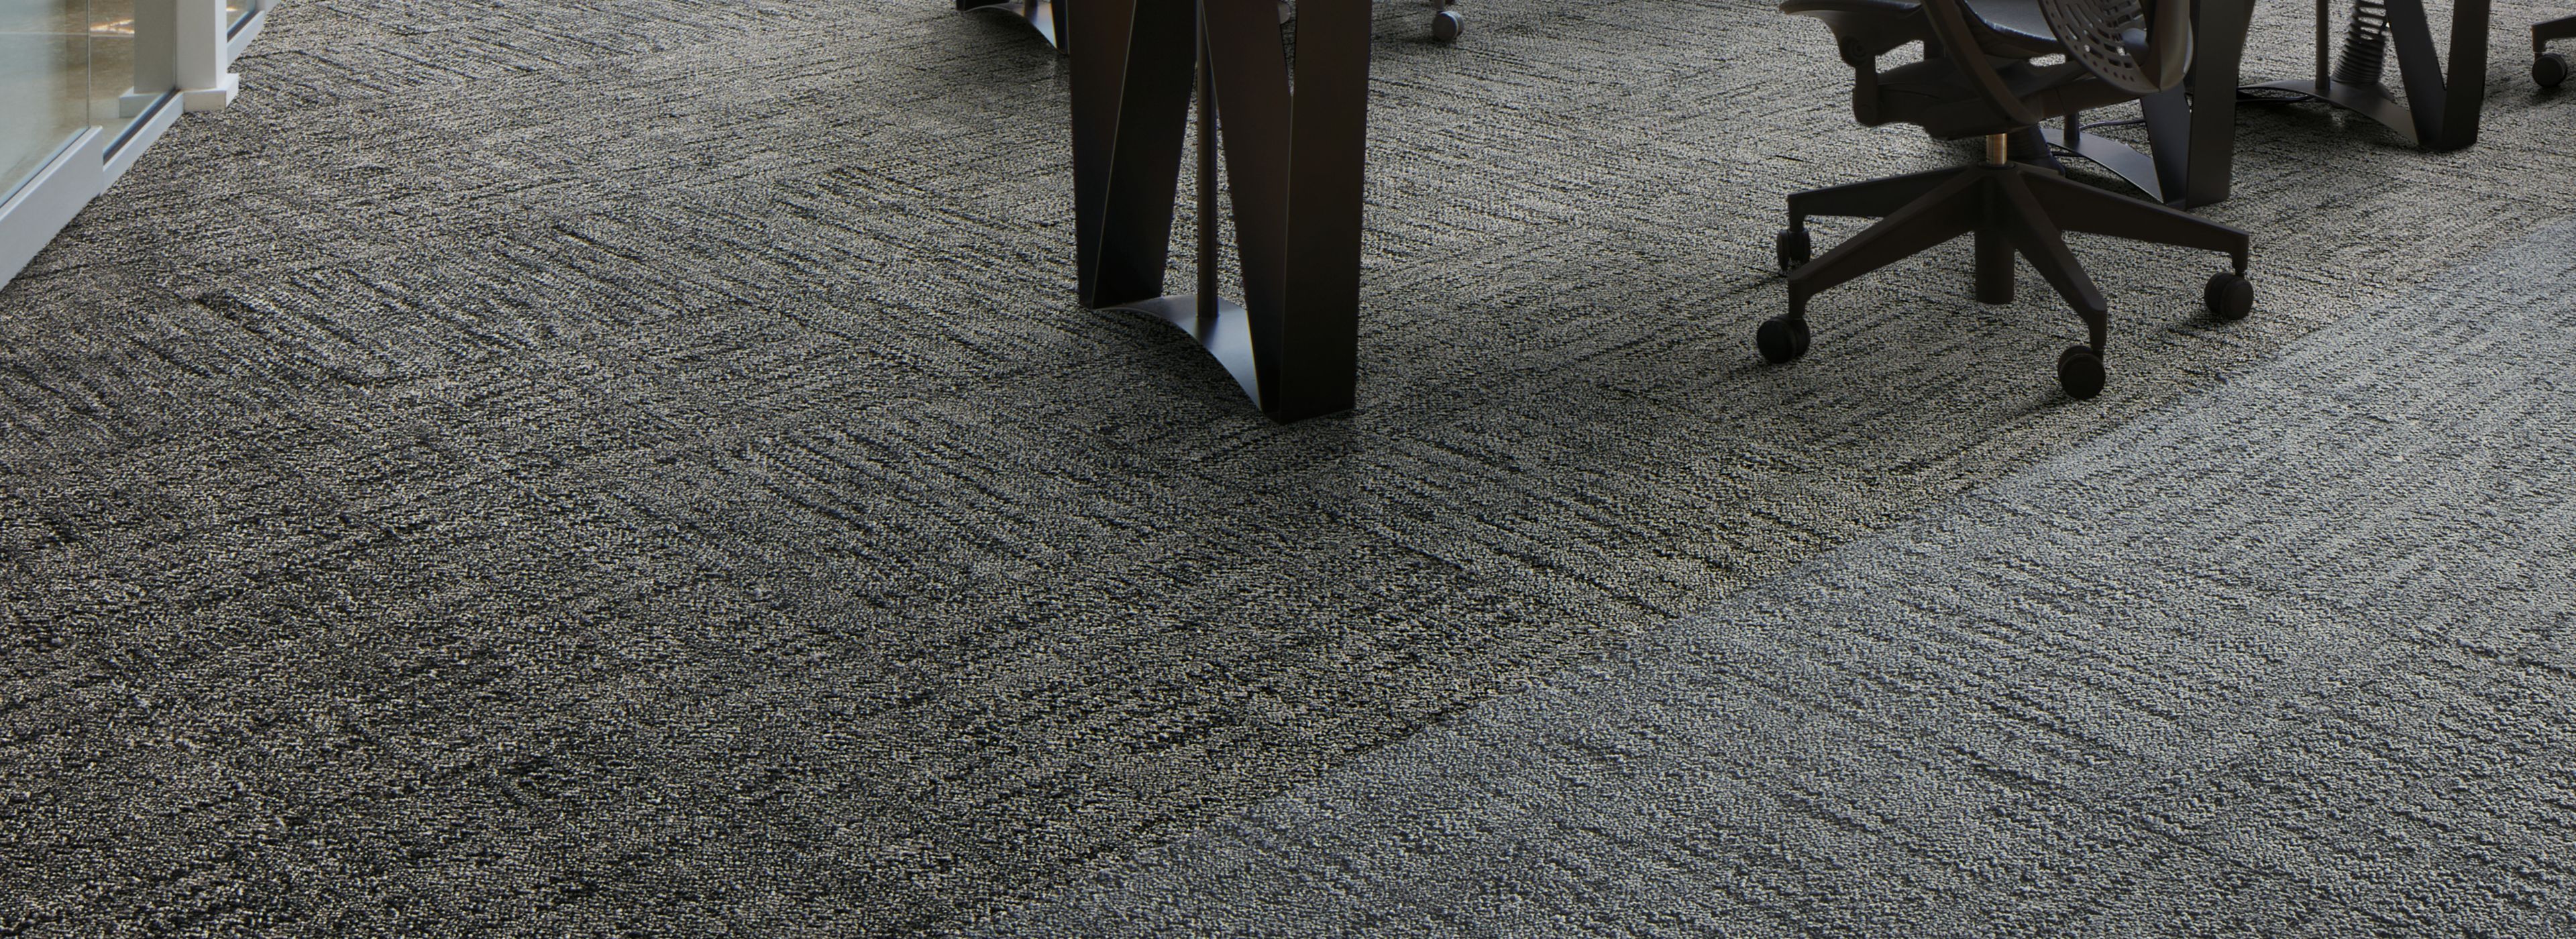 Interface Mirror Mirror carpet tile in open office space with tables and chairs image number 1